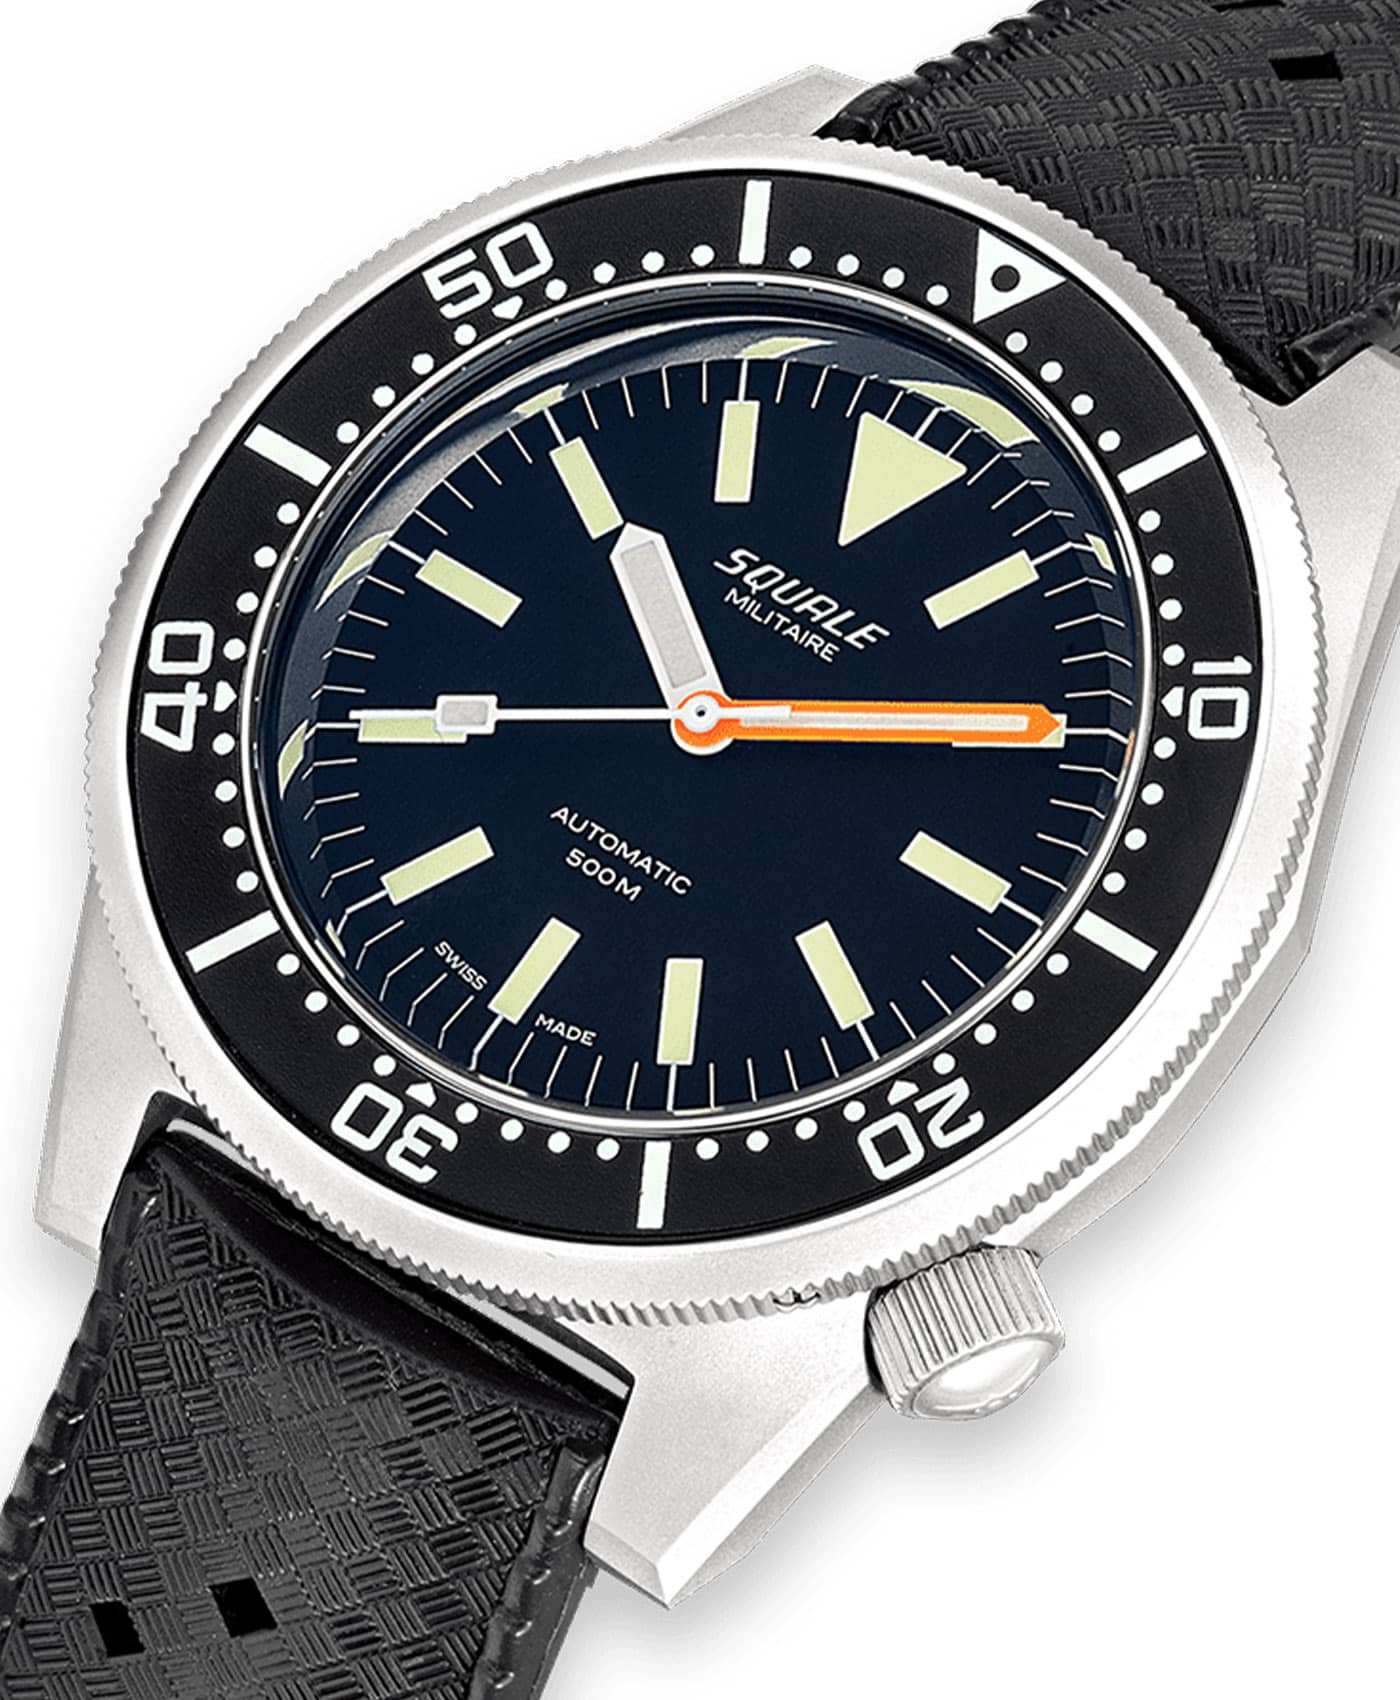 Squale - 1521 Black Militaire - Blasted - Rubber - 1521MILBL.HT-close up-min